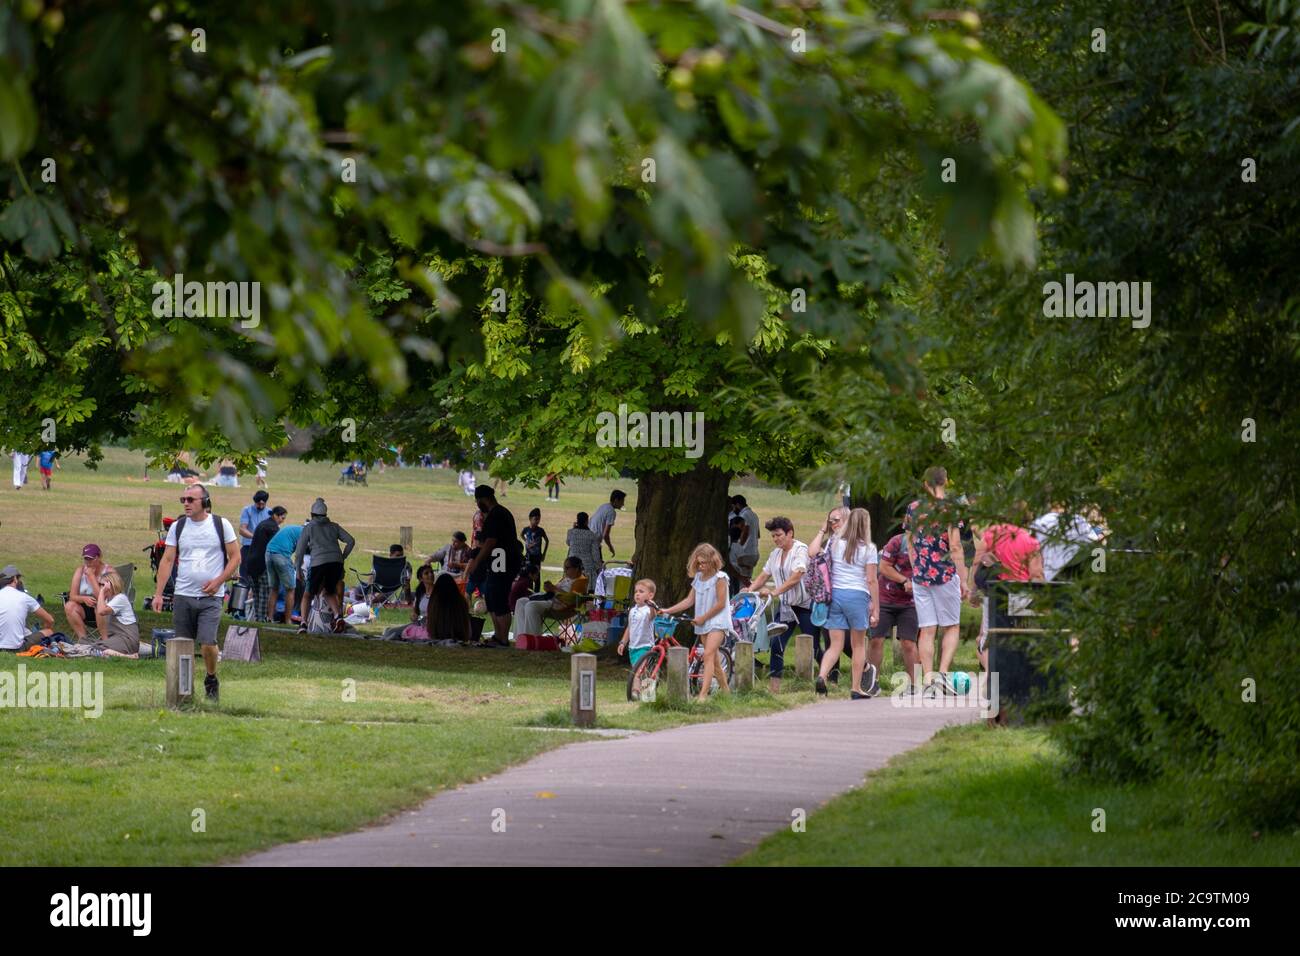 Watford, Hertfordshire, UK. 2 August 2020. Busy Sunday afternoon of picnics in Cassiobury Park, the largest public open space in Watford. Stock Photo